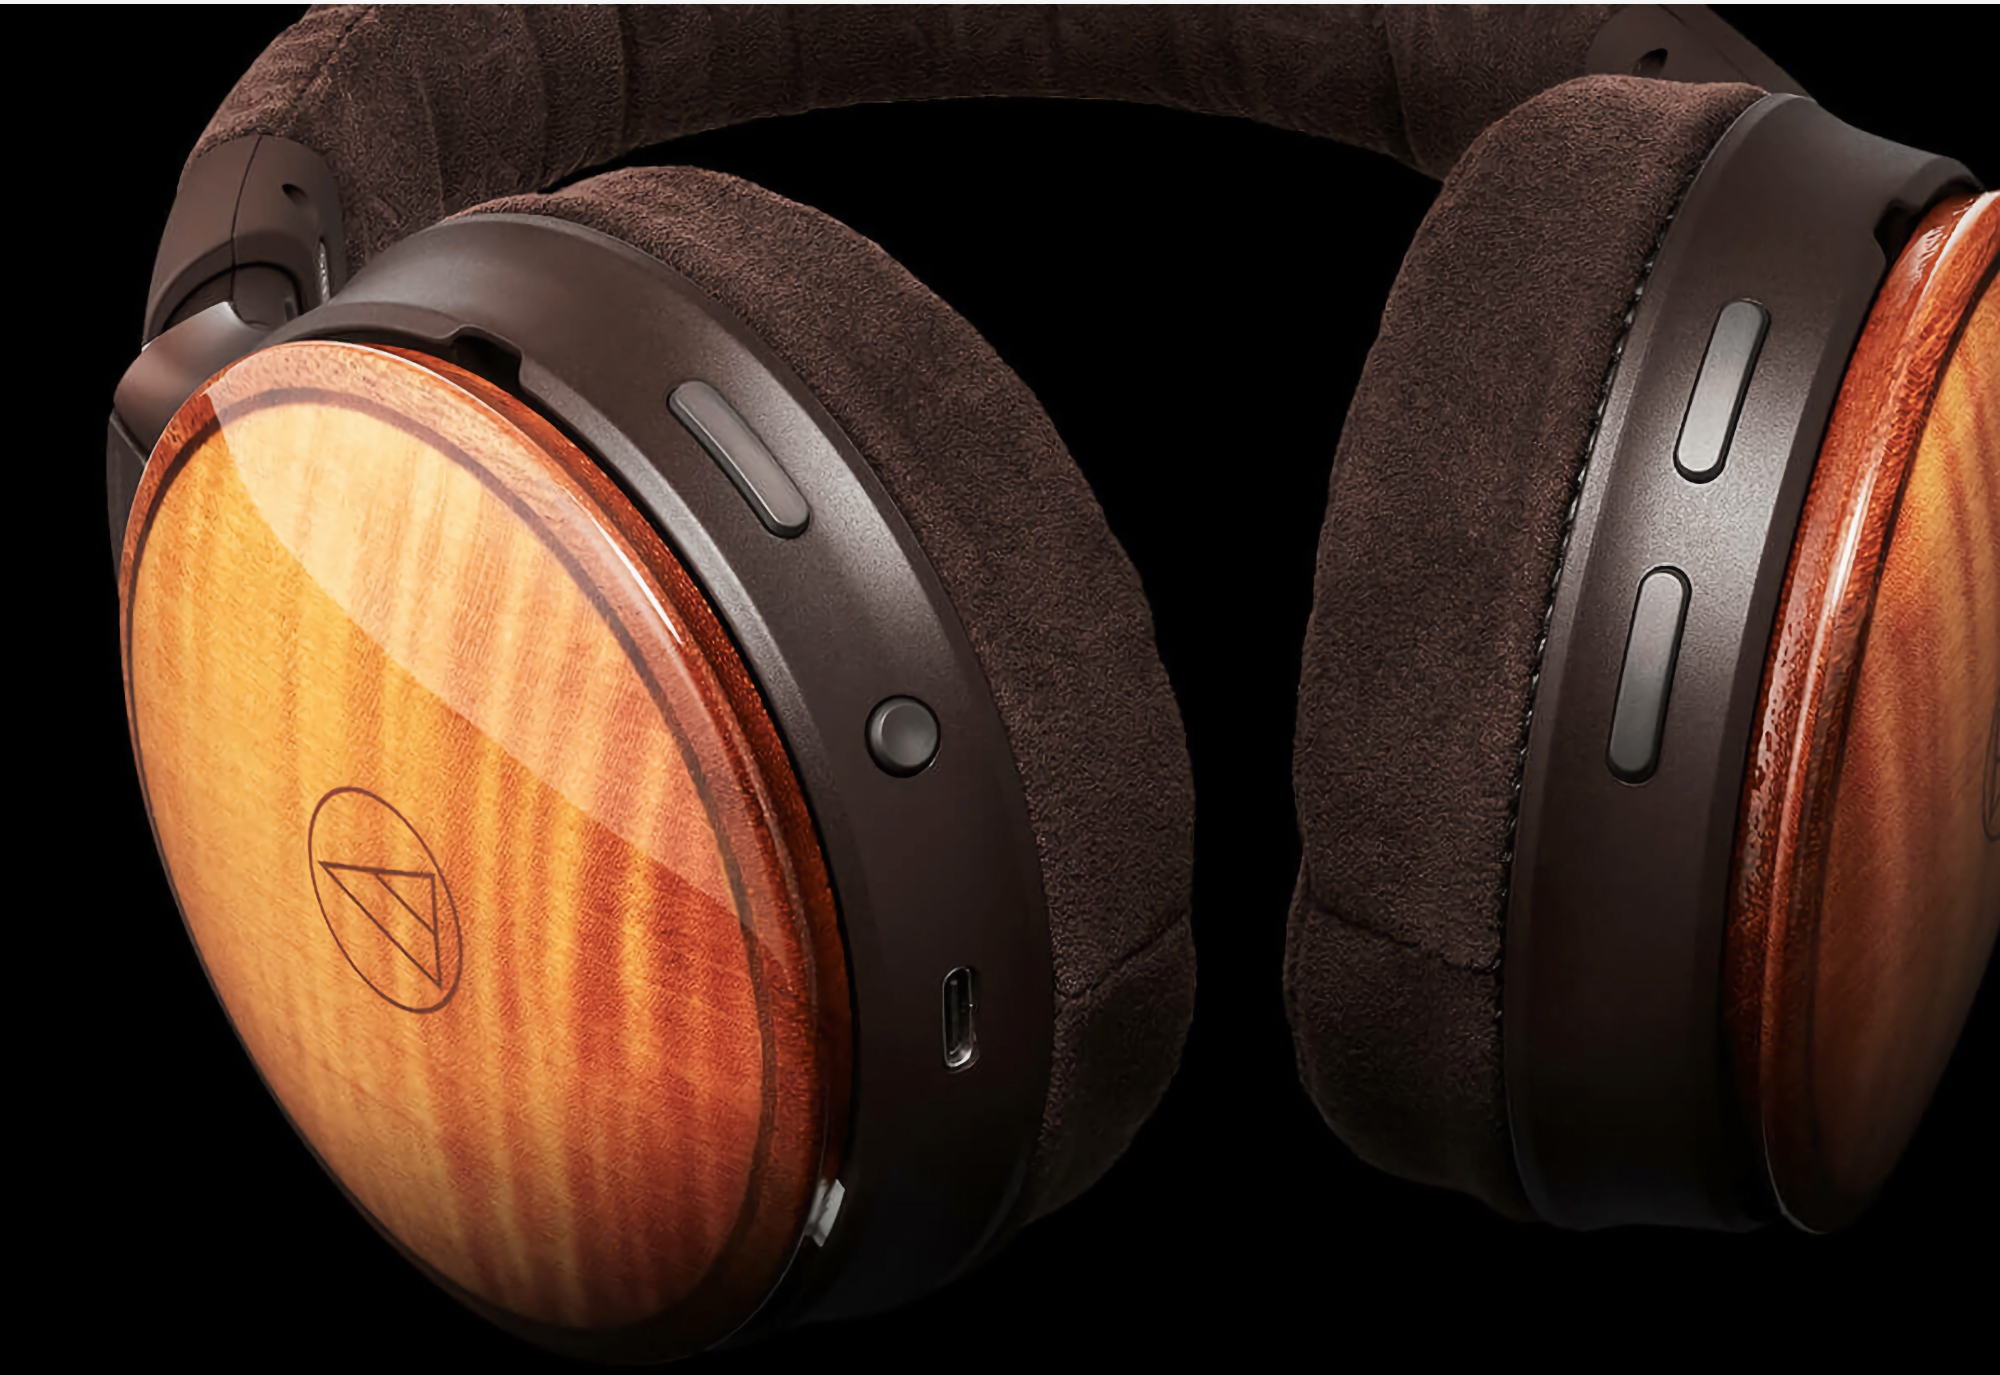 Audio-Technica introduced wireless wood headphones with stereo sound, Hi-Fi for $2700